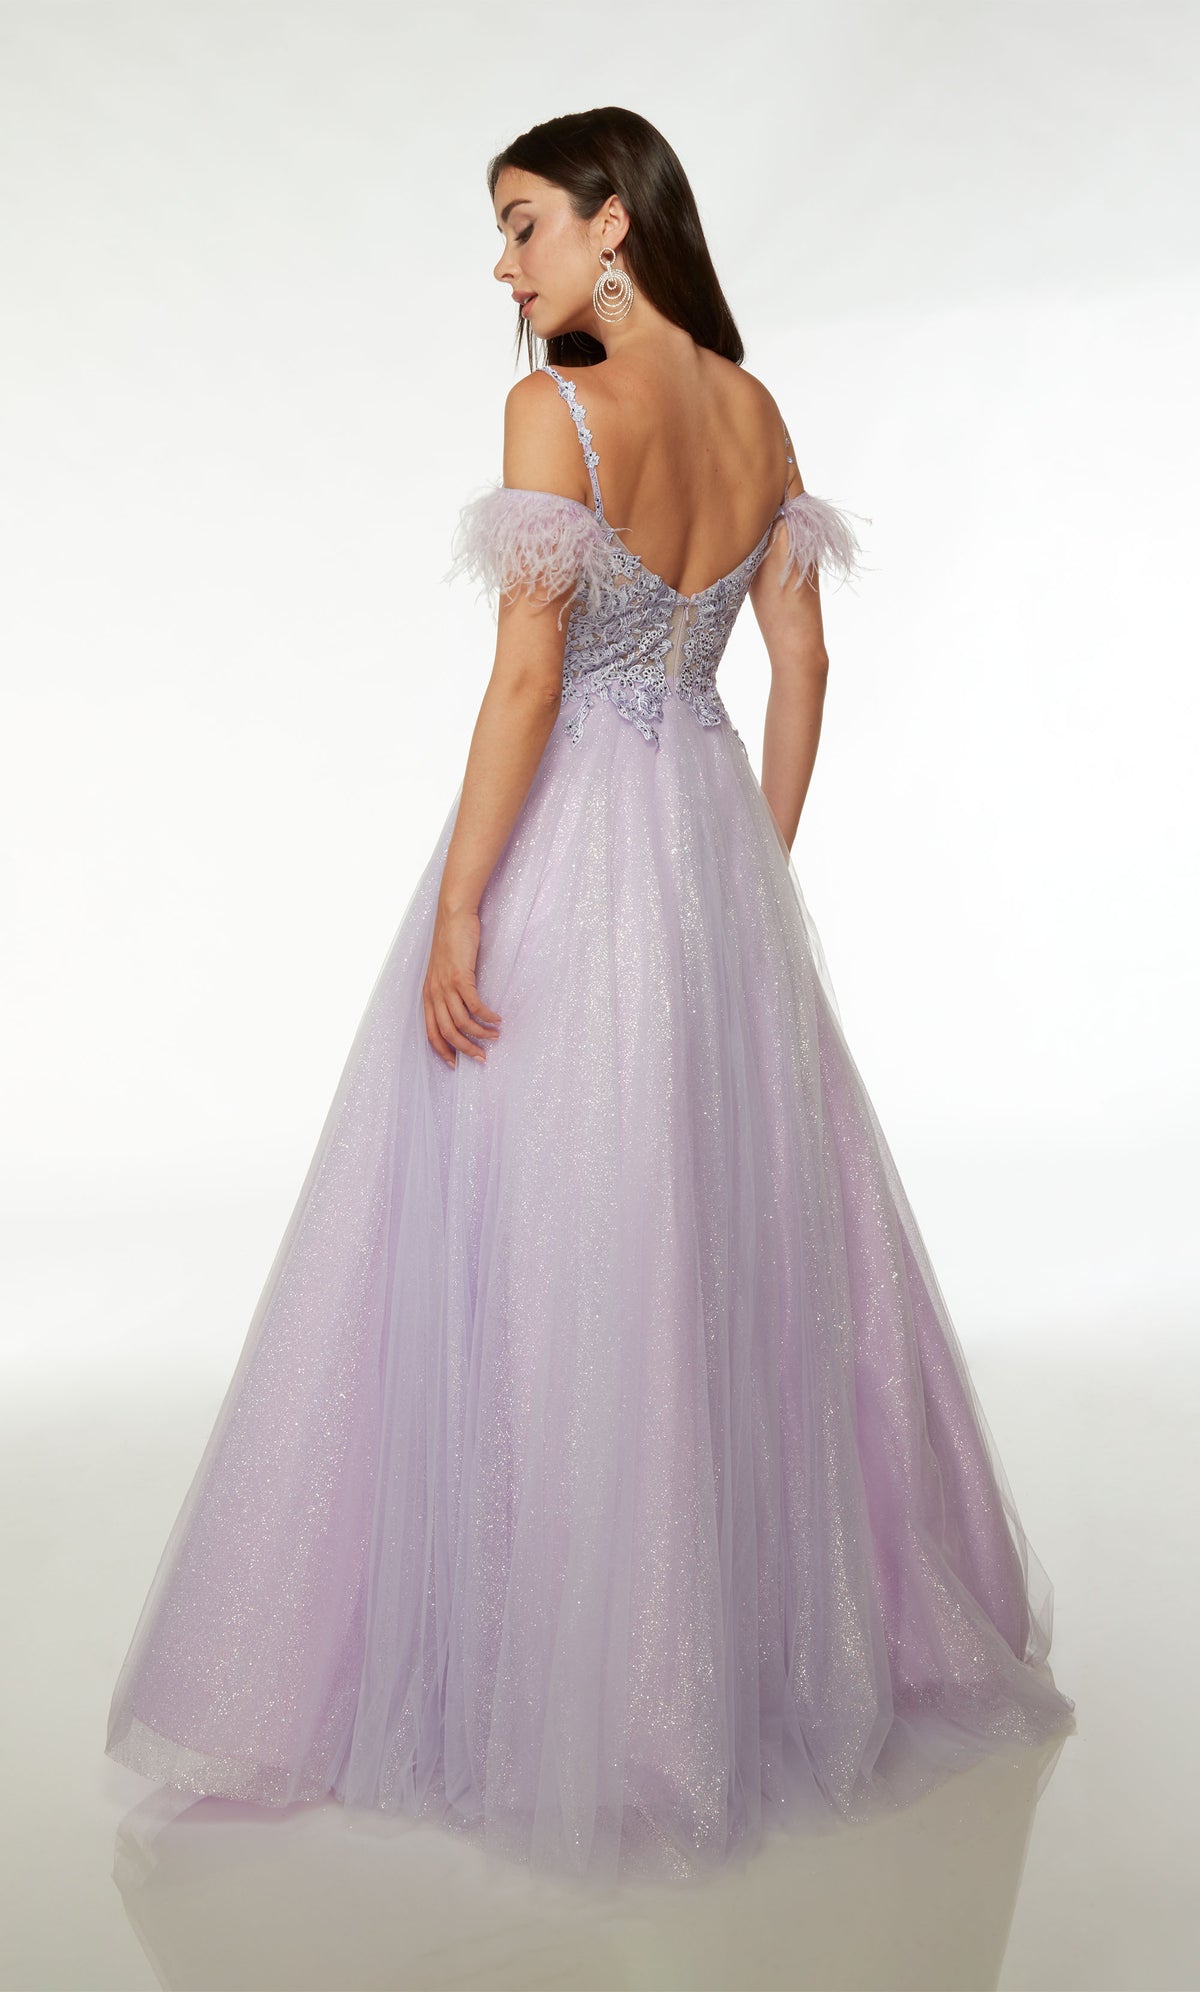 Ultra-charming light purple ball gown with glitter tulle, floral lace-adorned bodice, feather sleeves, and an convenient zip-up back.